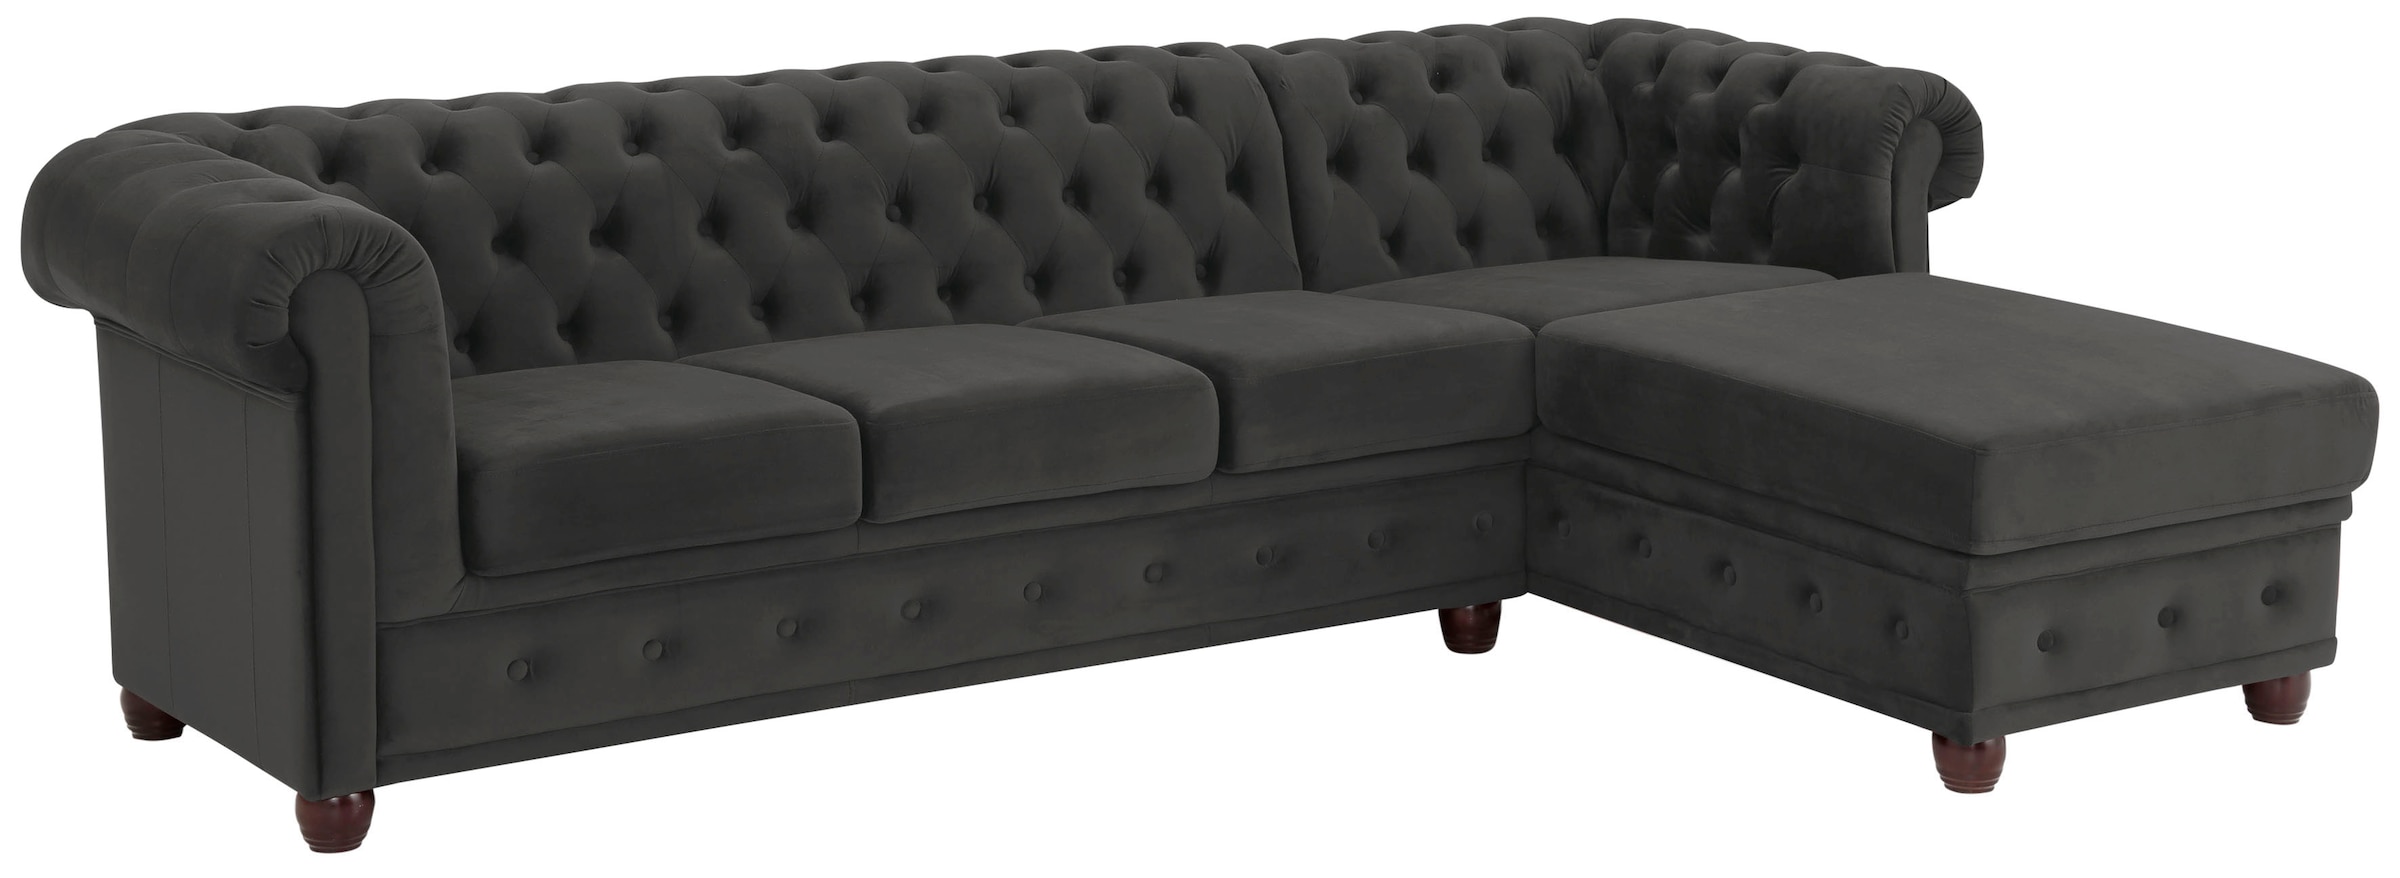 Home affaire Chesterfield-Sofa »New Castle L-Form«, hochwertige Knopfheftung in Chesterfield-Design, B/T/H: 255(171/72)